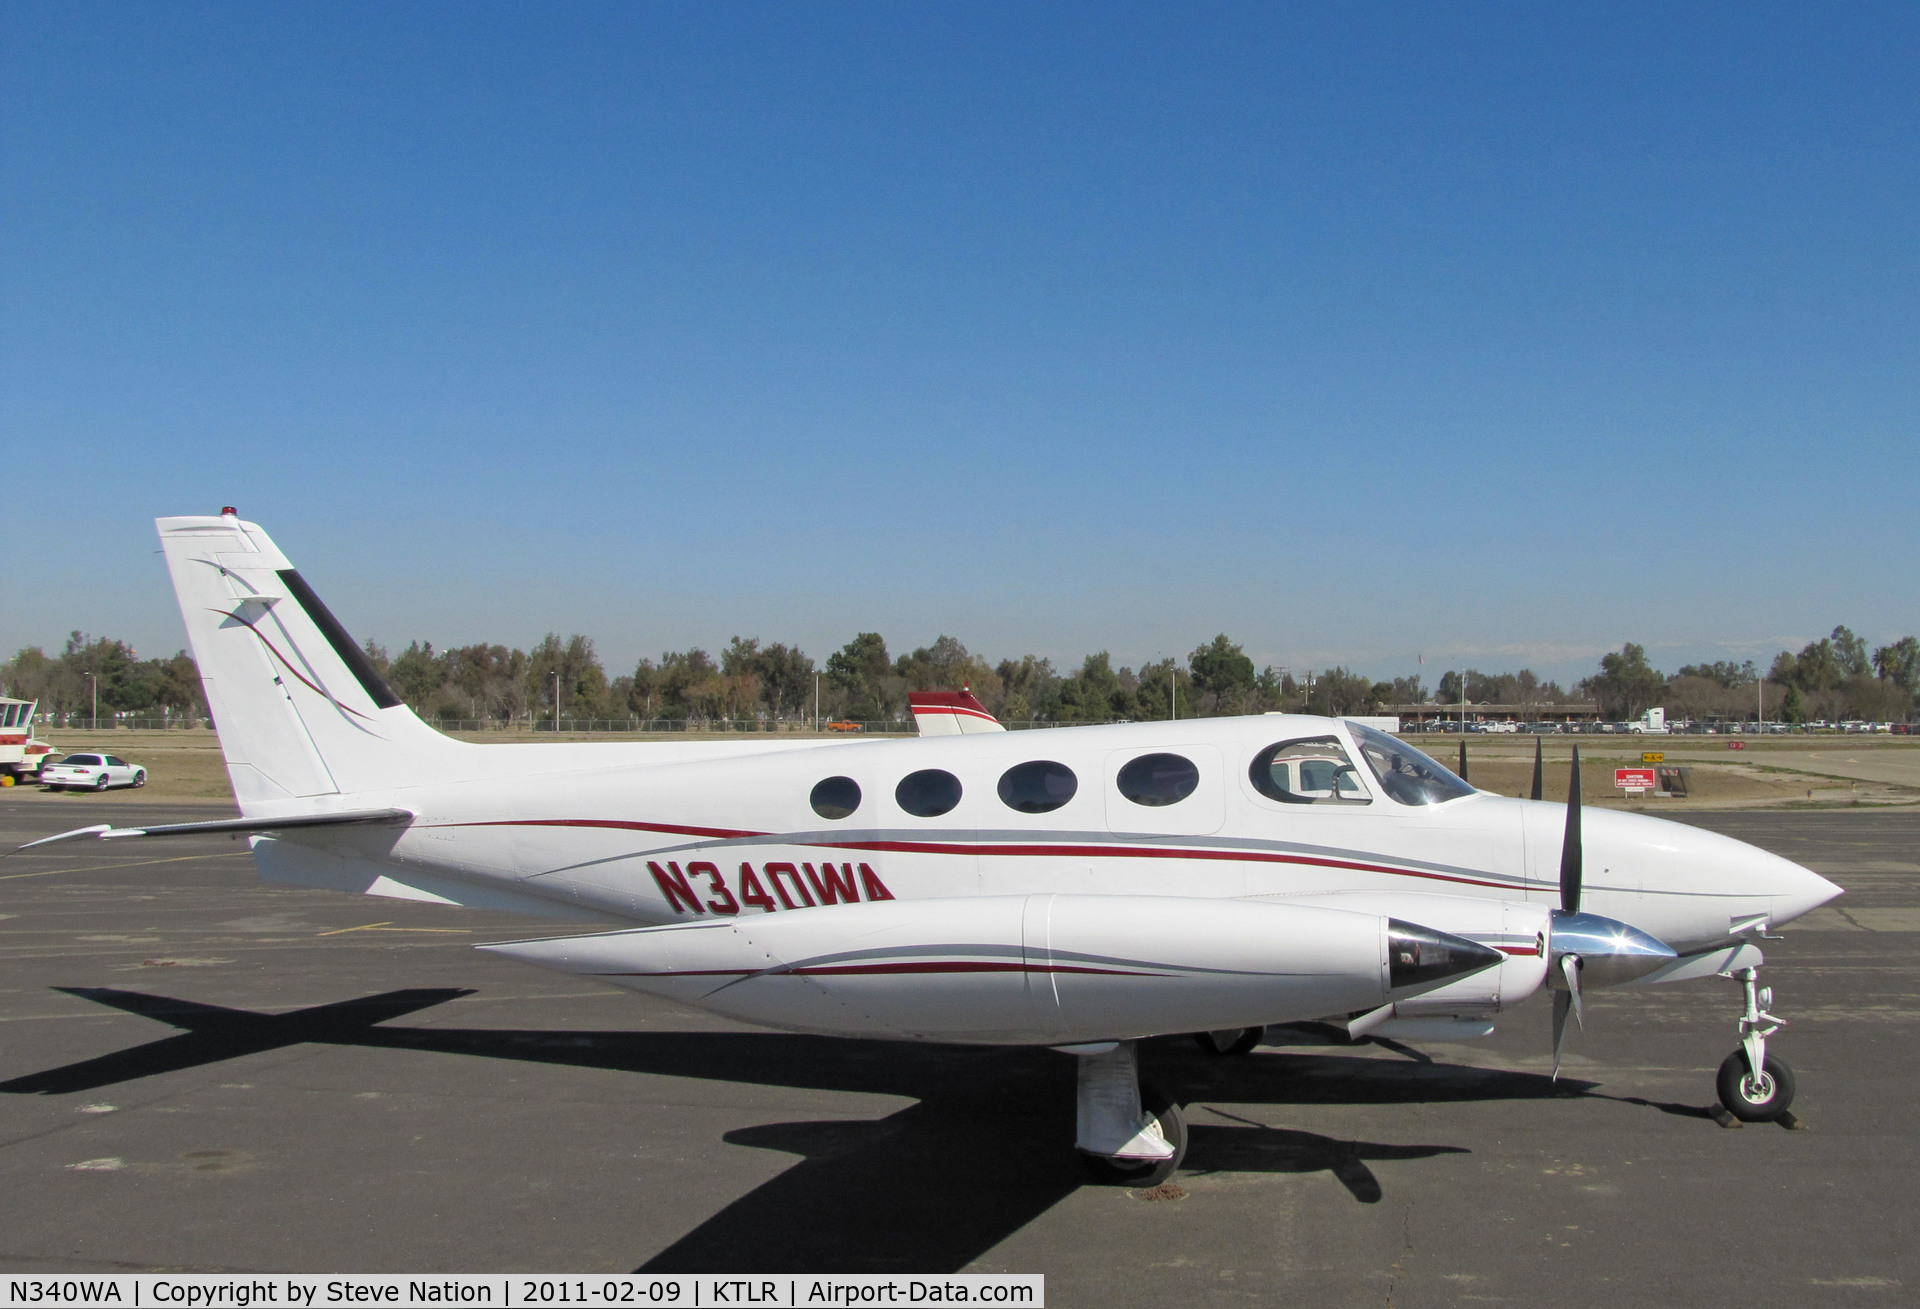 N340WA, 1972 Cessna 340 C/N 340-0035, 1972 Cessna 340 at Tulare, CA for International Ag Exposition